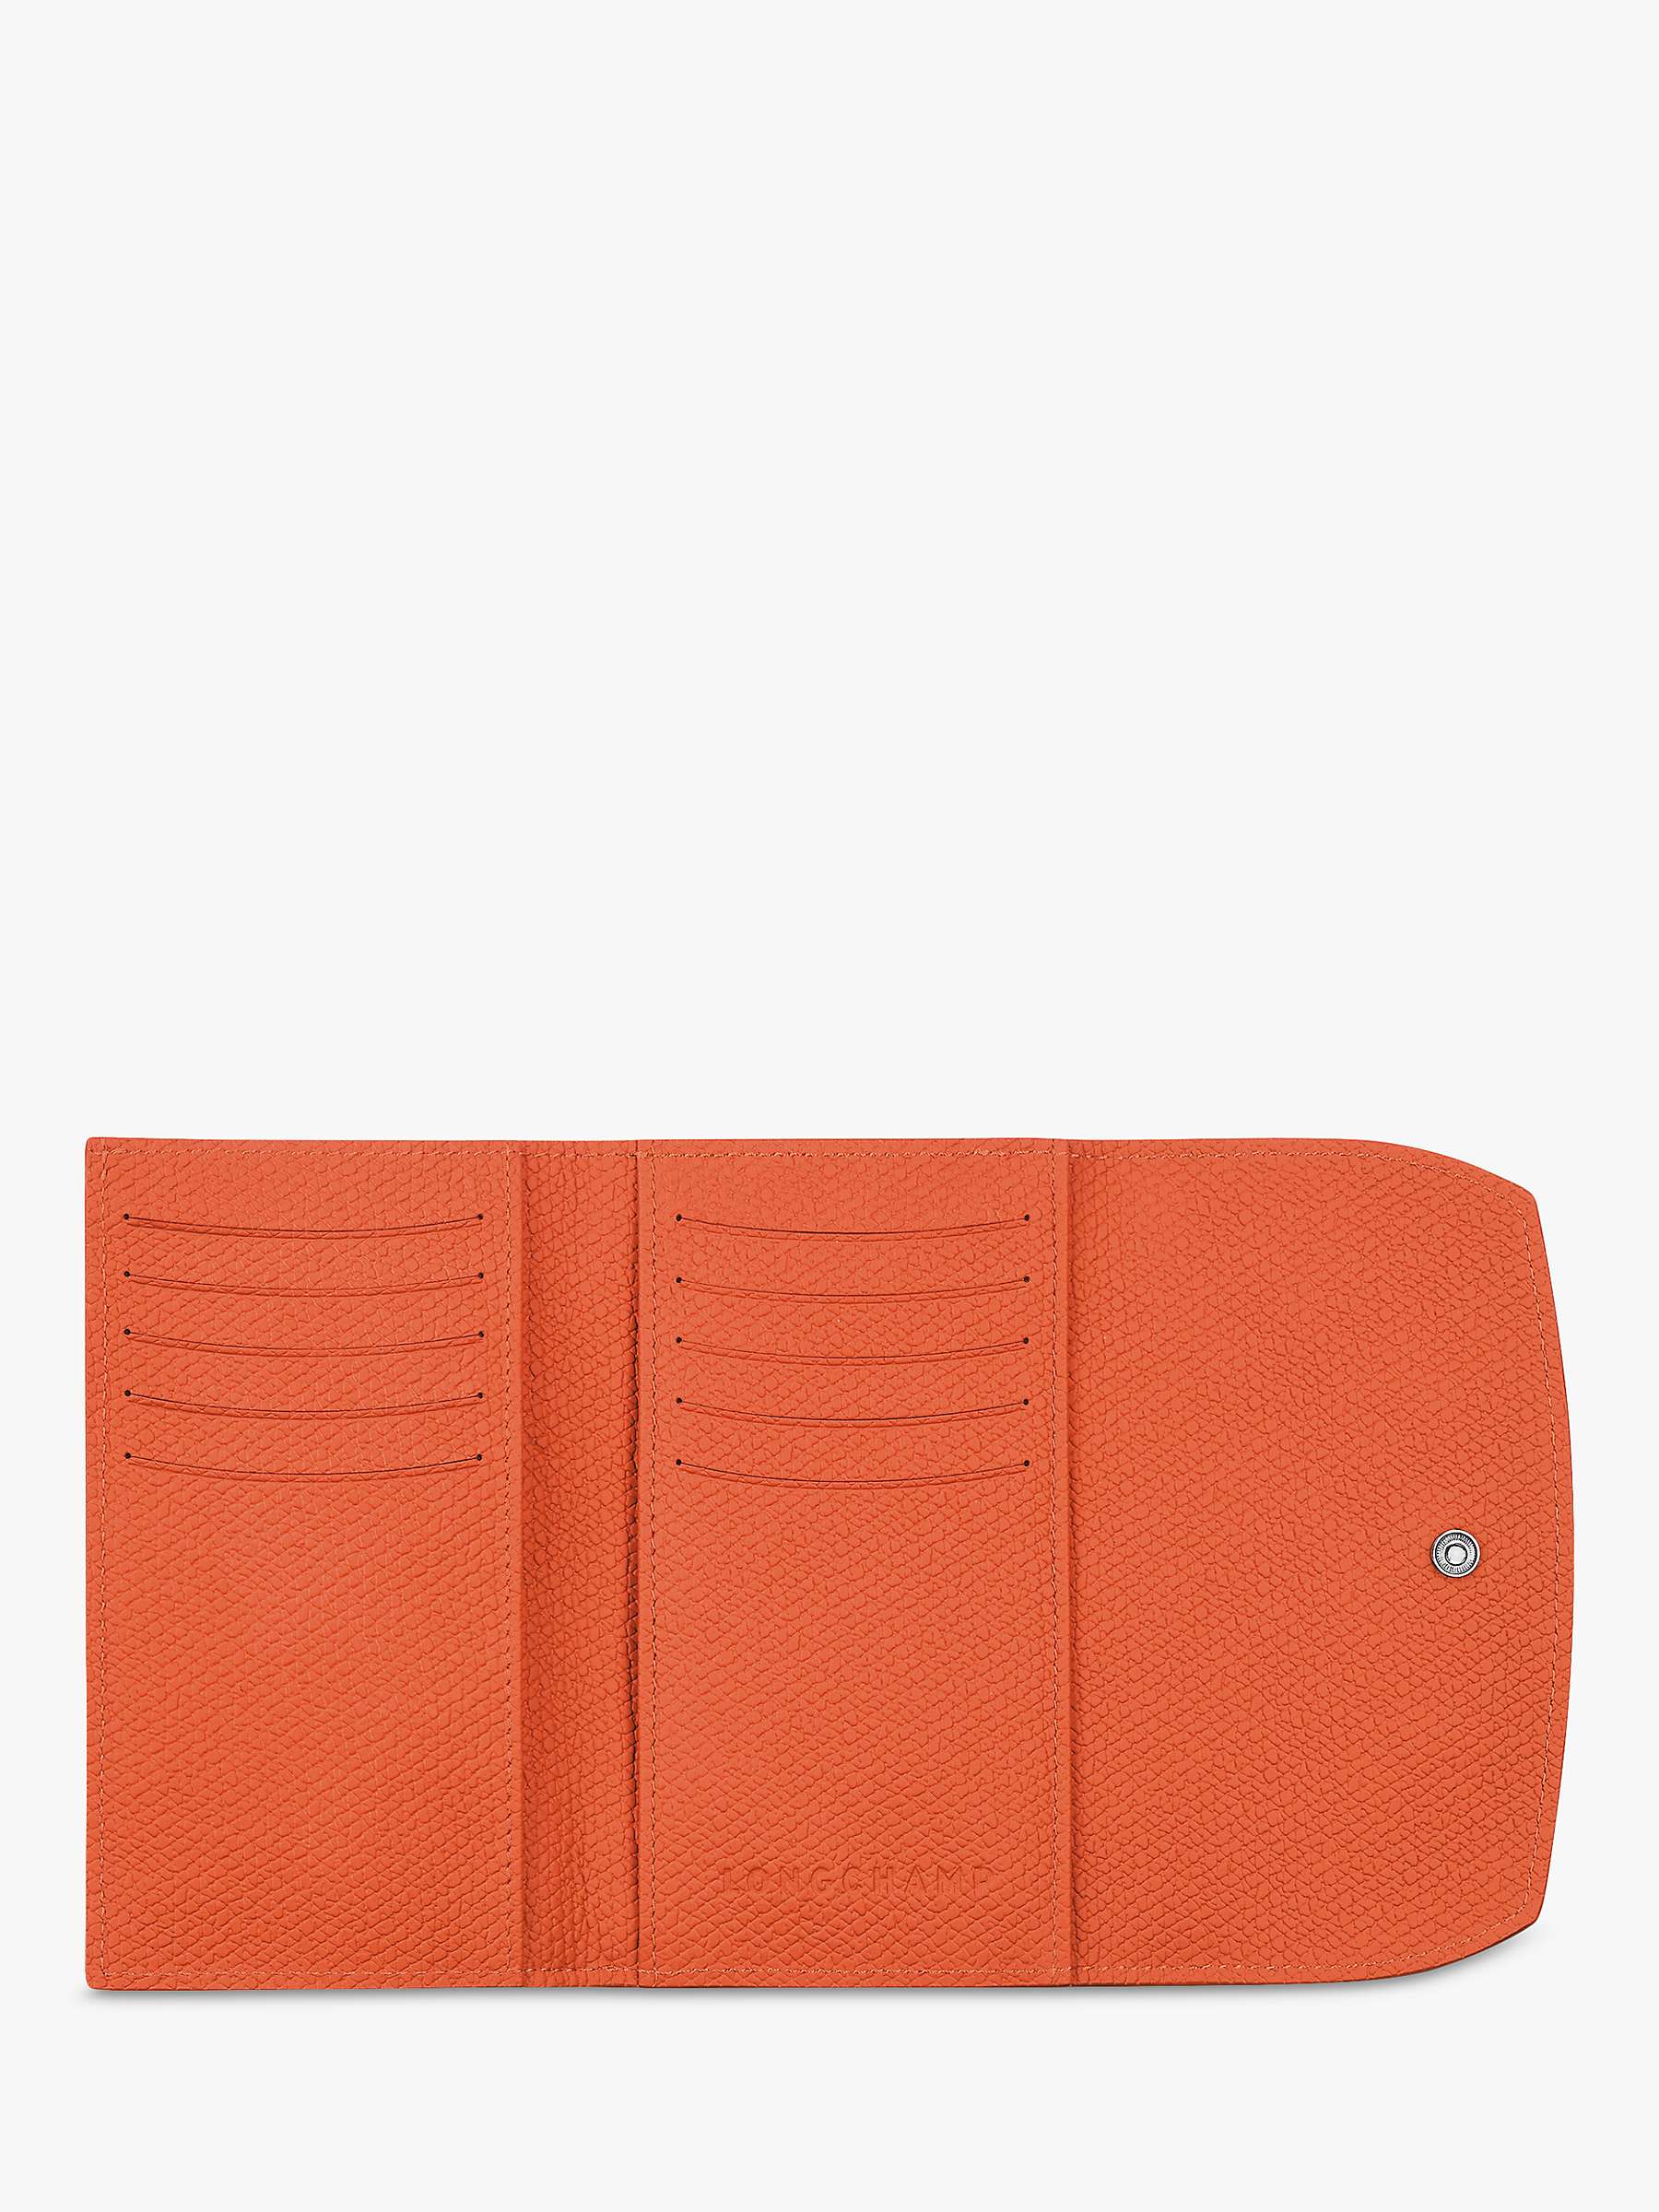 Buy Longchamp Roseau Leather Compact Wallet Online at johnlewis.com